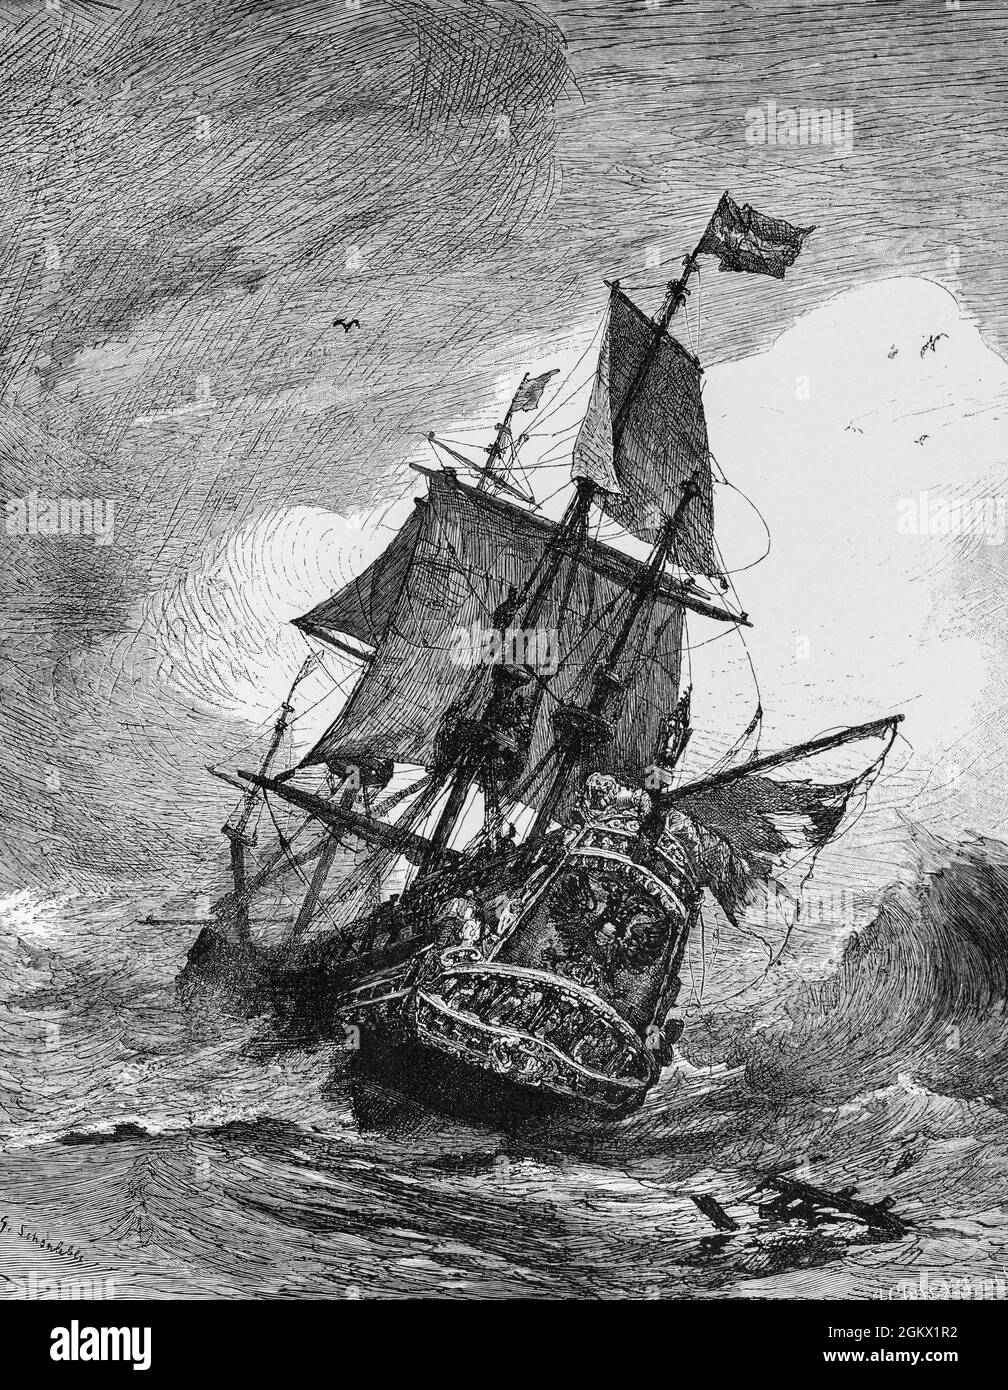 A hanseatic battle ship of the 17th century in extremely choppy seas, historical illustration 1880, Stock Photo